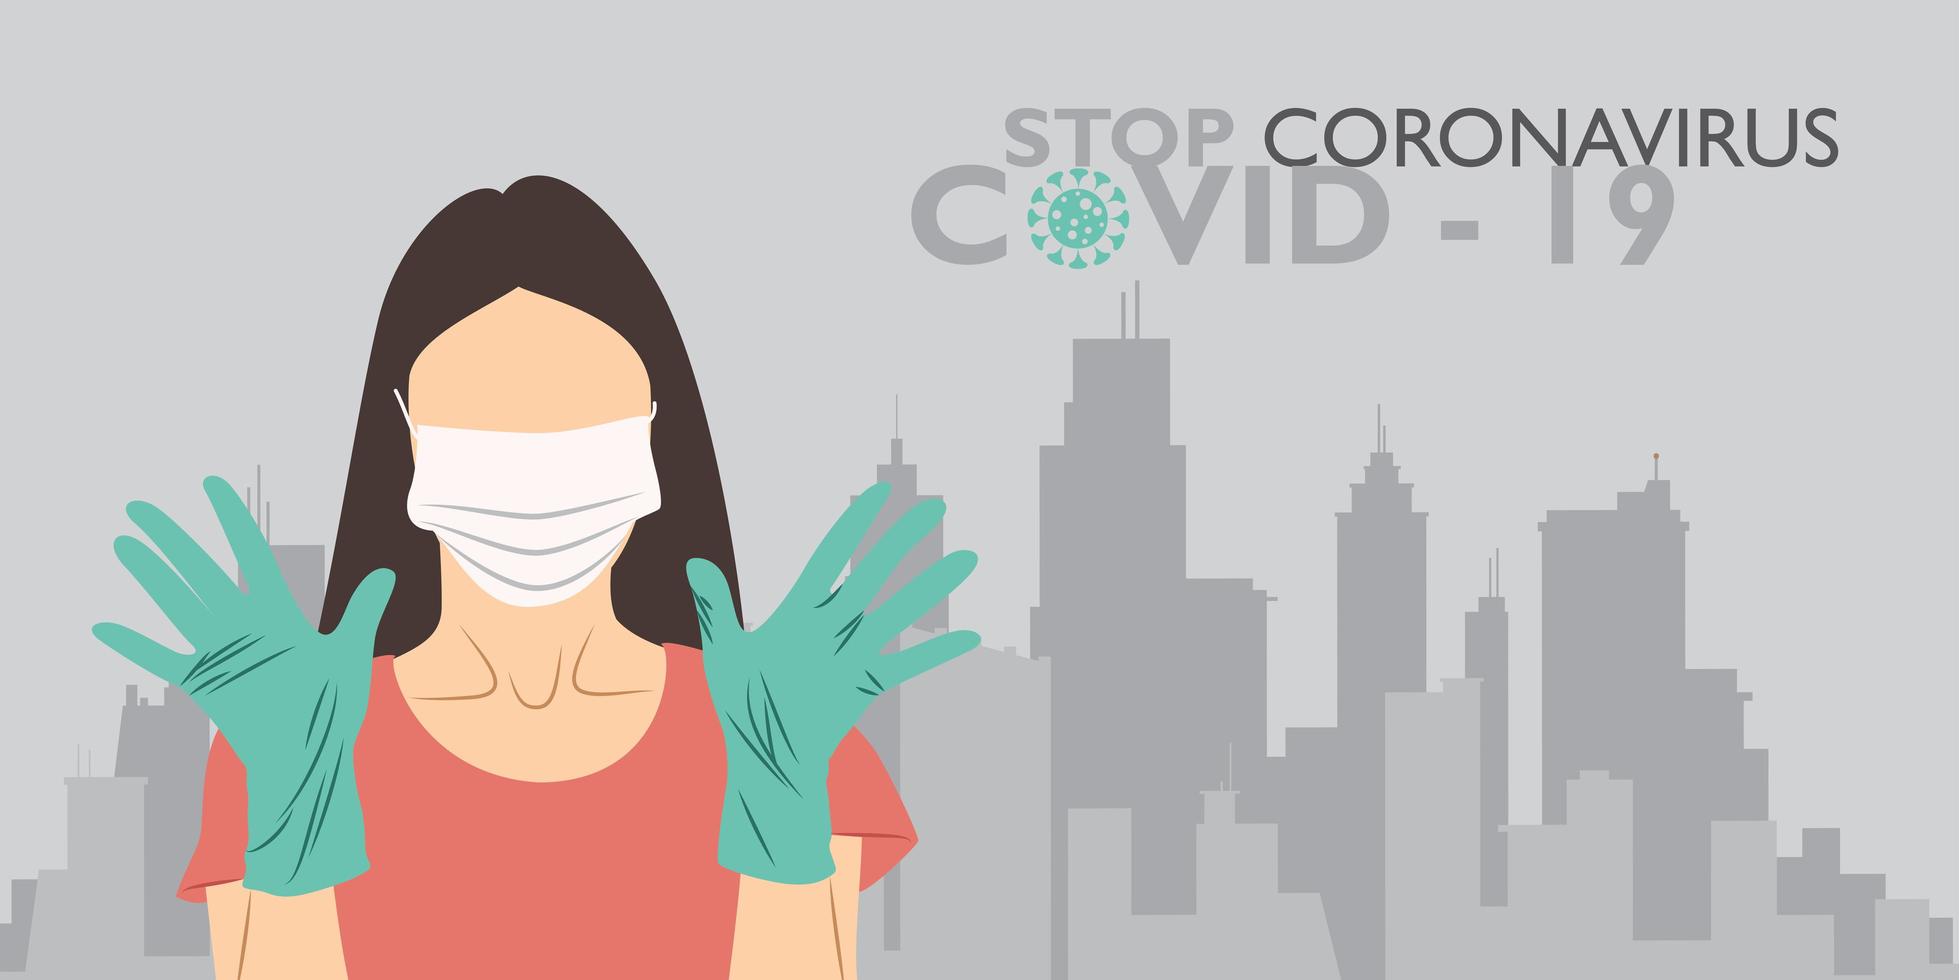 Stop Corona Virus by Wearing gloves poster vector